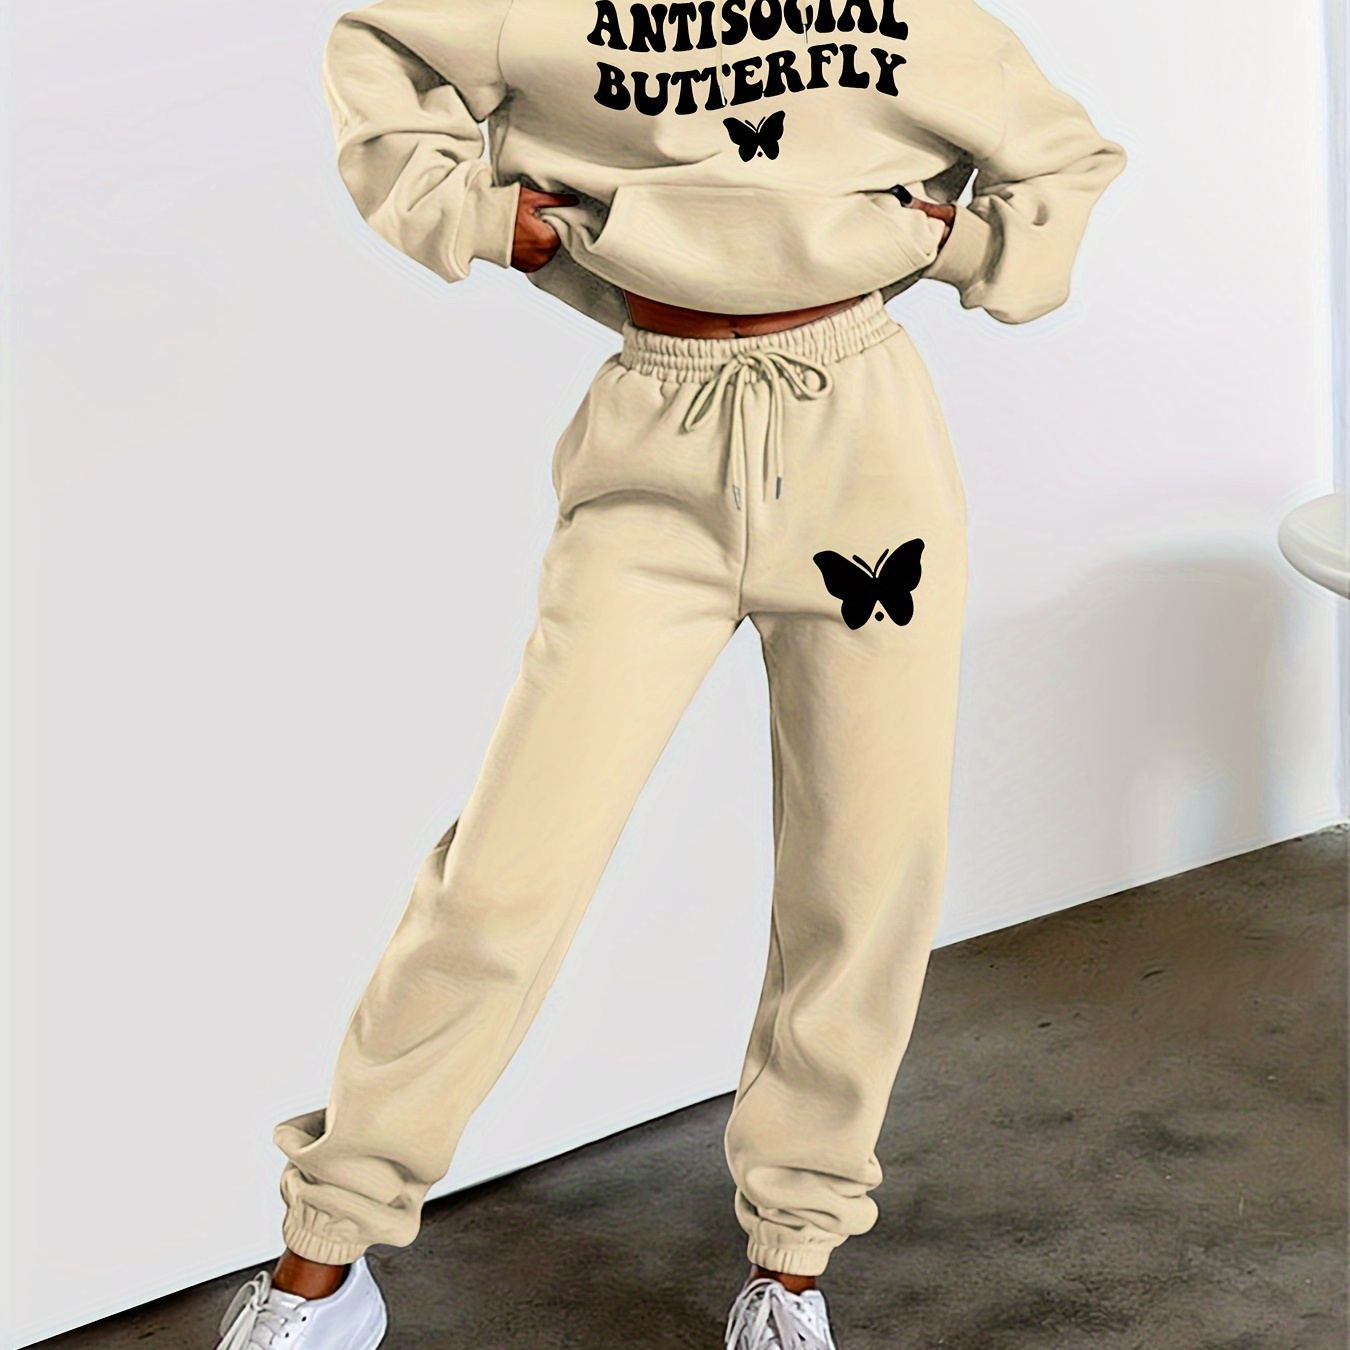 

2pcs Butterfly & Letter Print Casual Sports Set, Long Sleeves Drawstring Hooded Sweatshirt & Elastic Waist Jogger Pant Sporty Suit, Women's Activewear